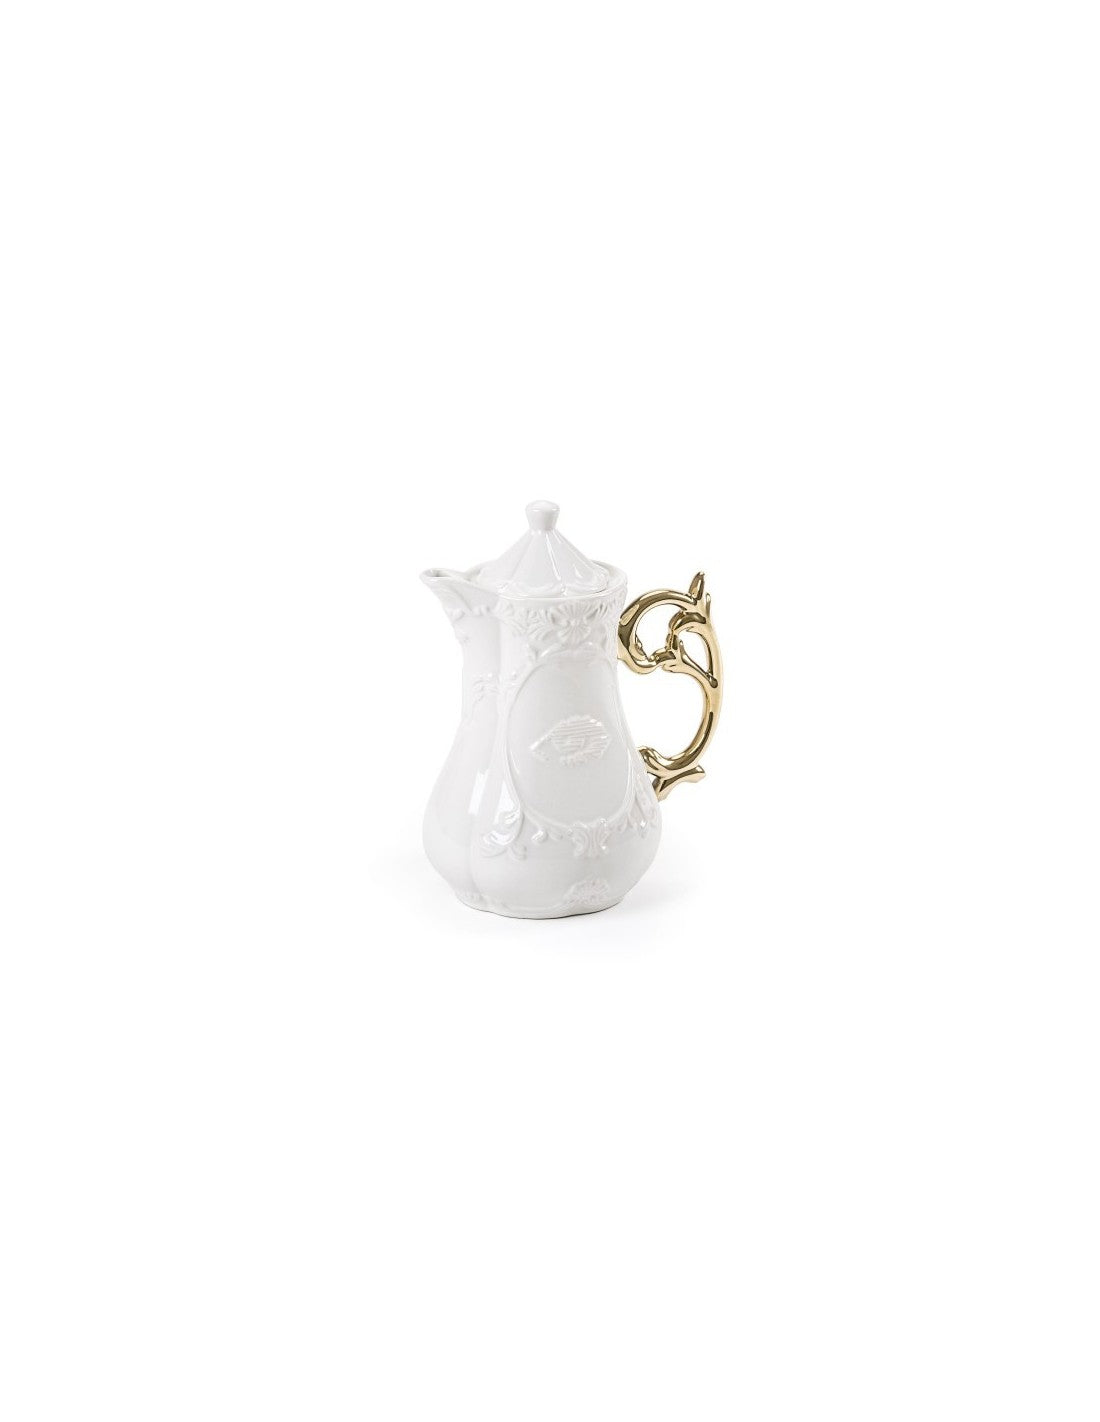 SELETTI i-wares teapot in porcelain with col. handles gold-set of 2